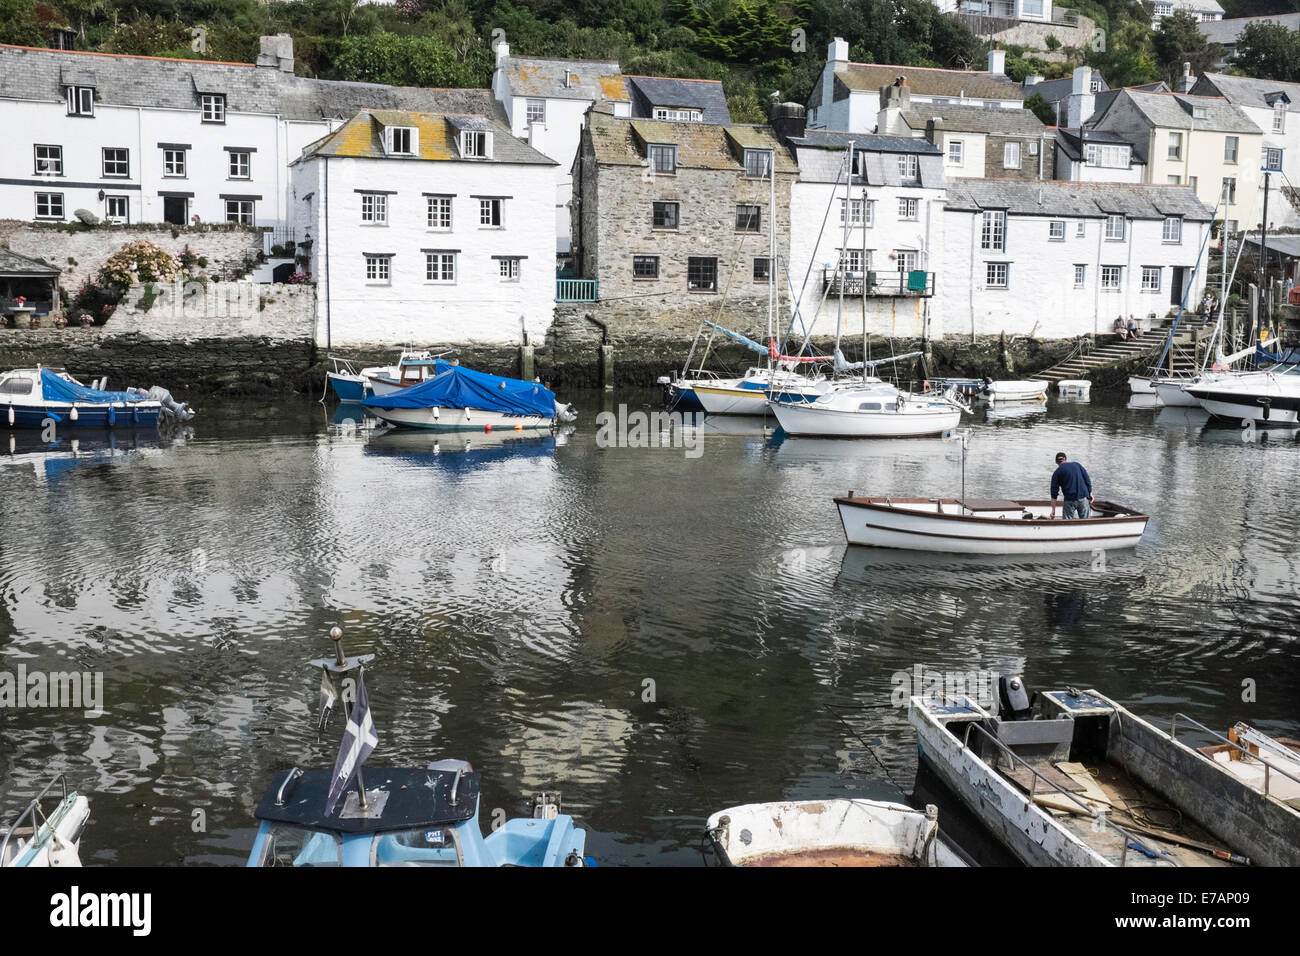 Fishermen's houses and fishing boats in the historic fishing village of Polperro, Cornwall Stock Photo